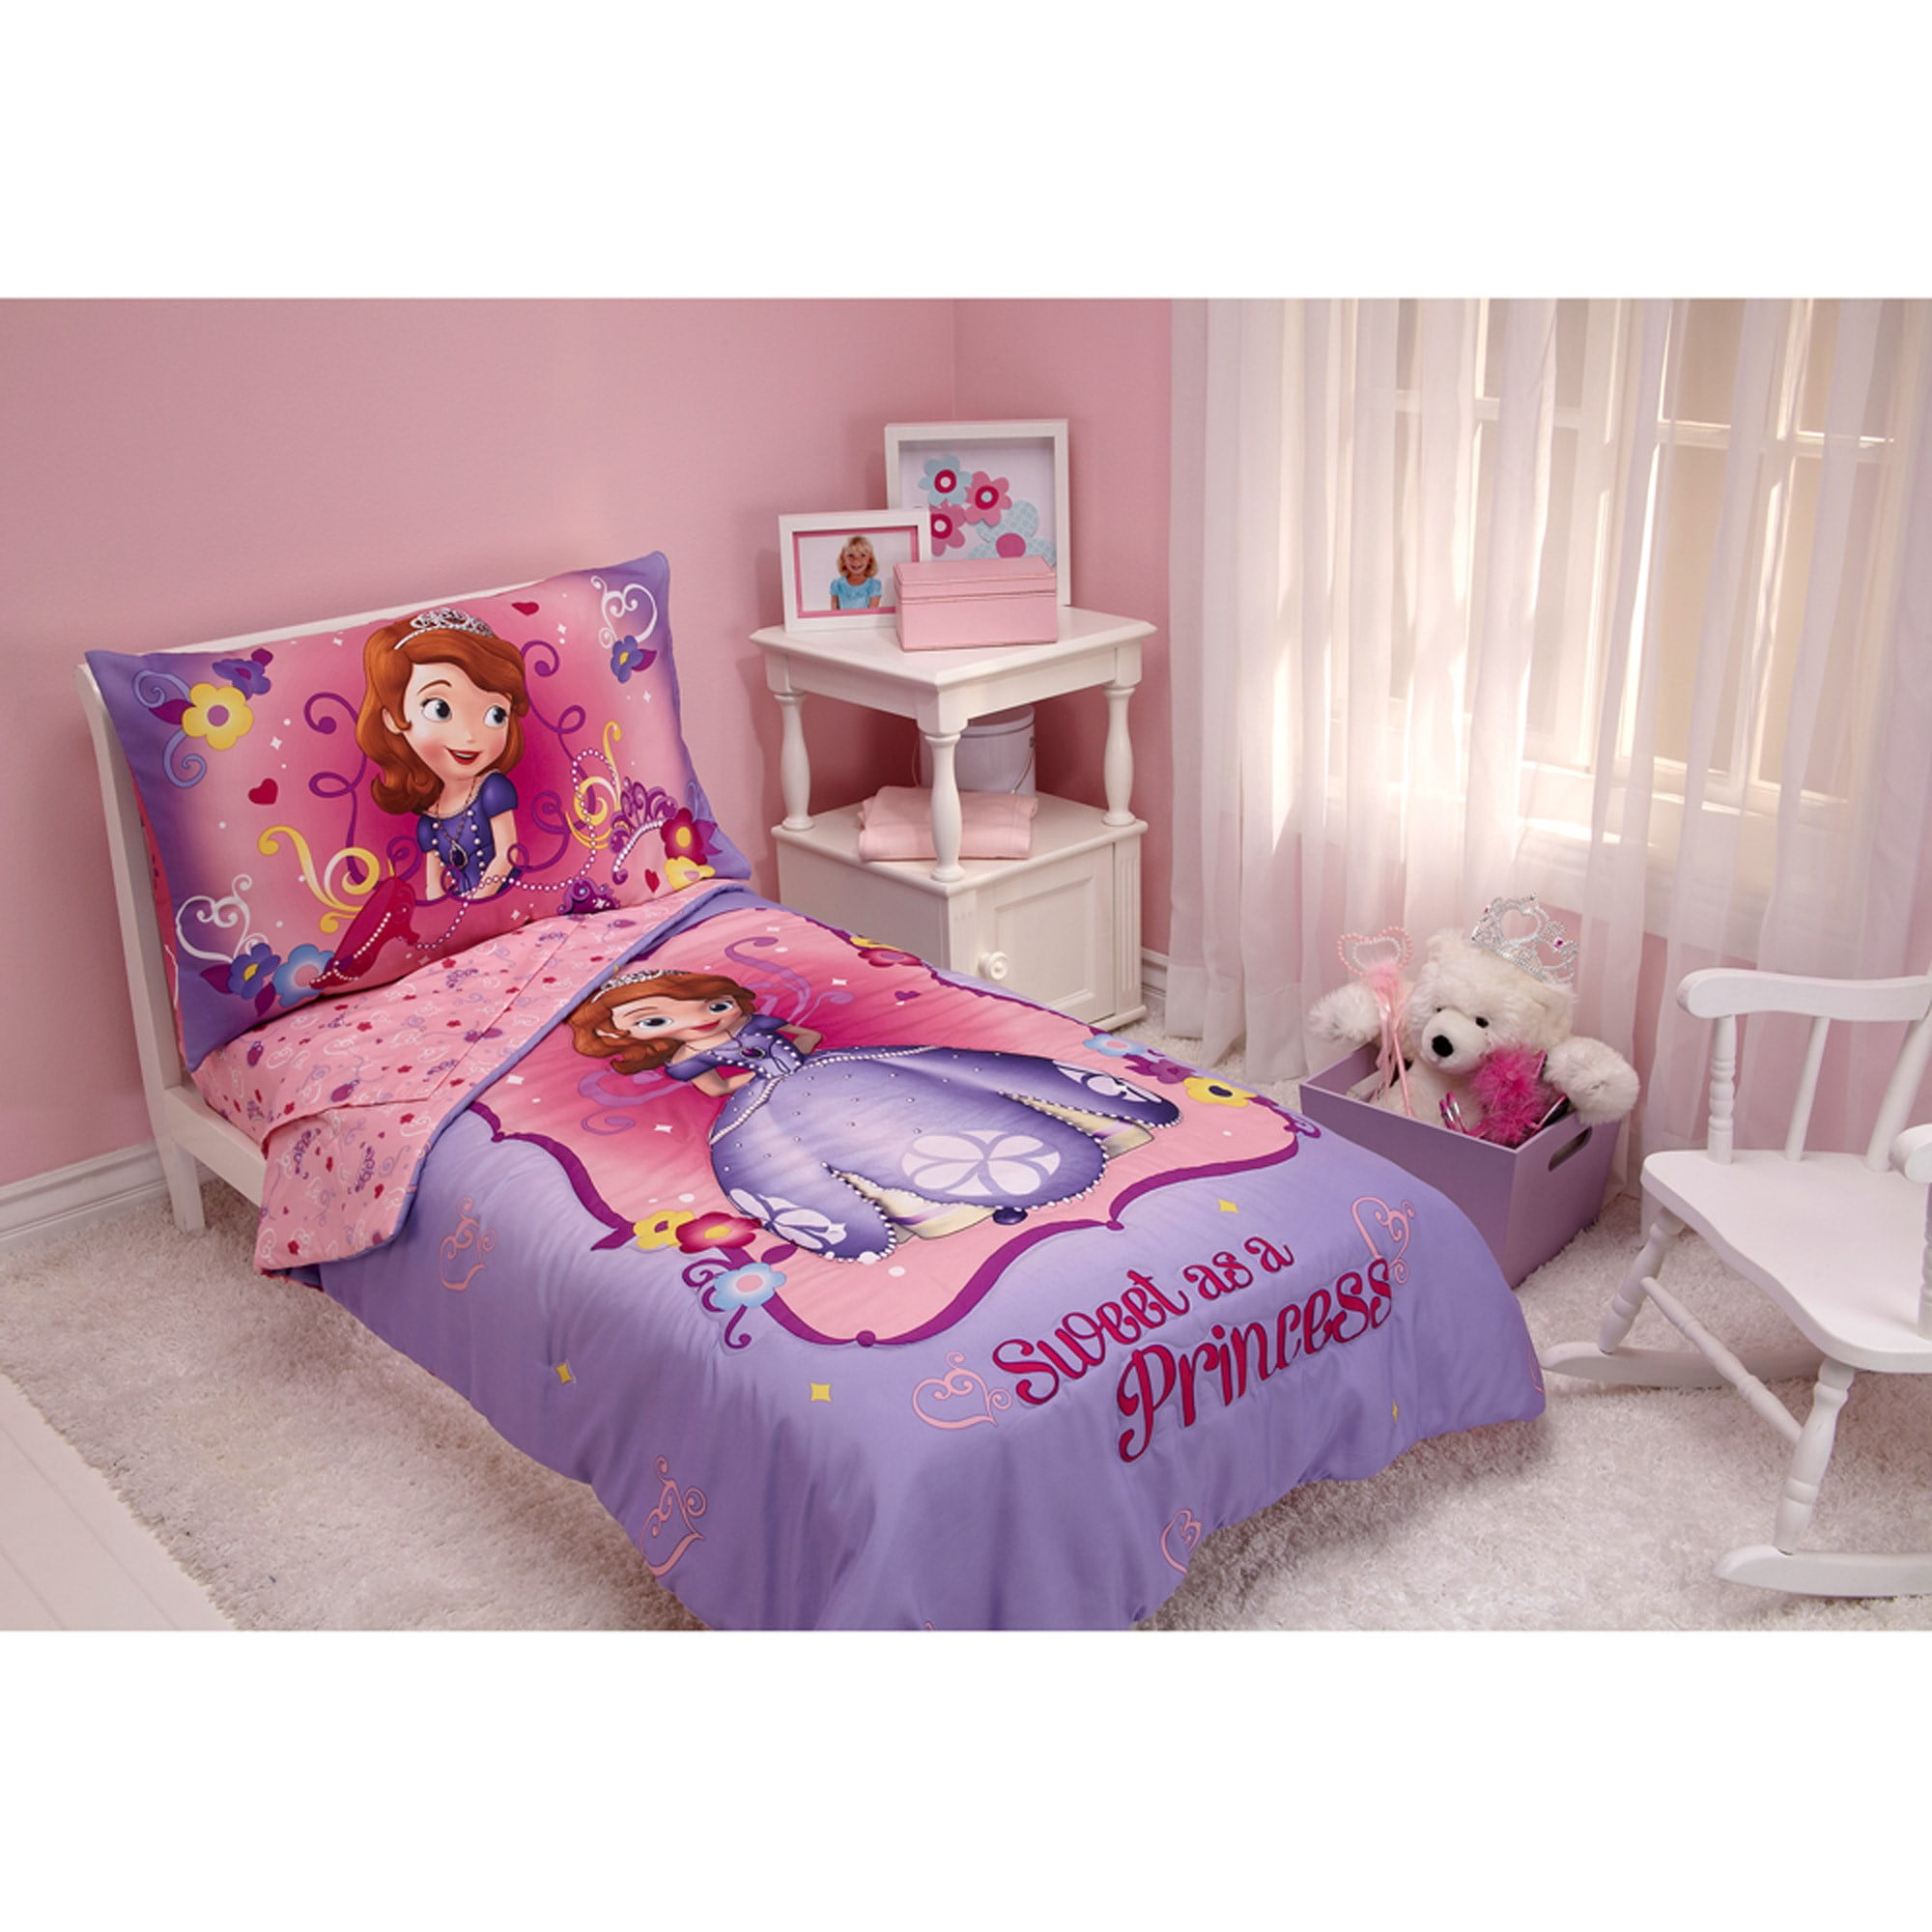 DISNEY SOFIA THE FIRST BED IN A BAG IN 4 PRINTS COMFORTER SET 